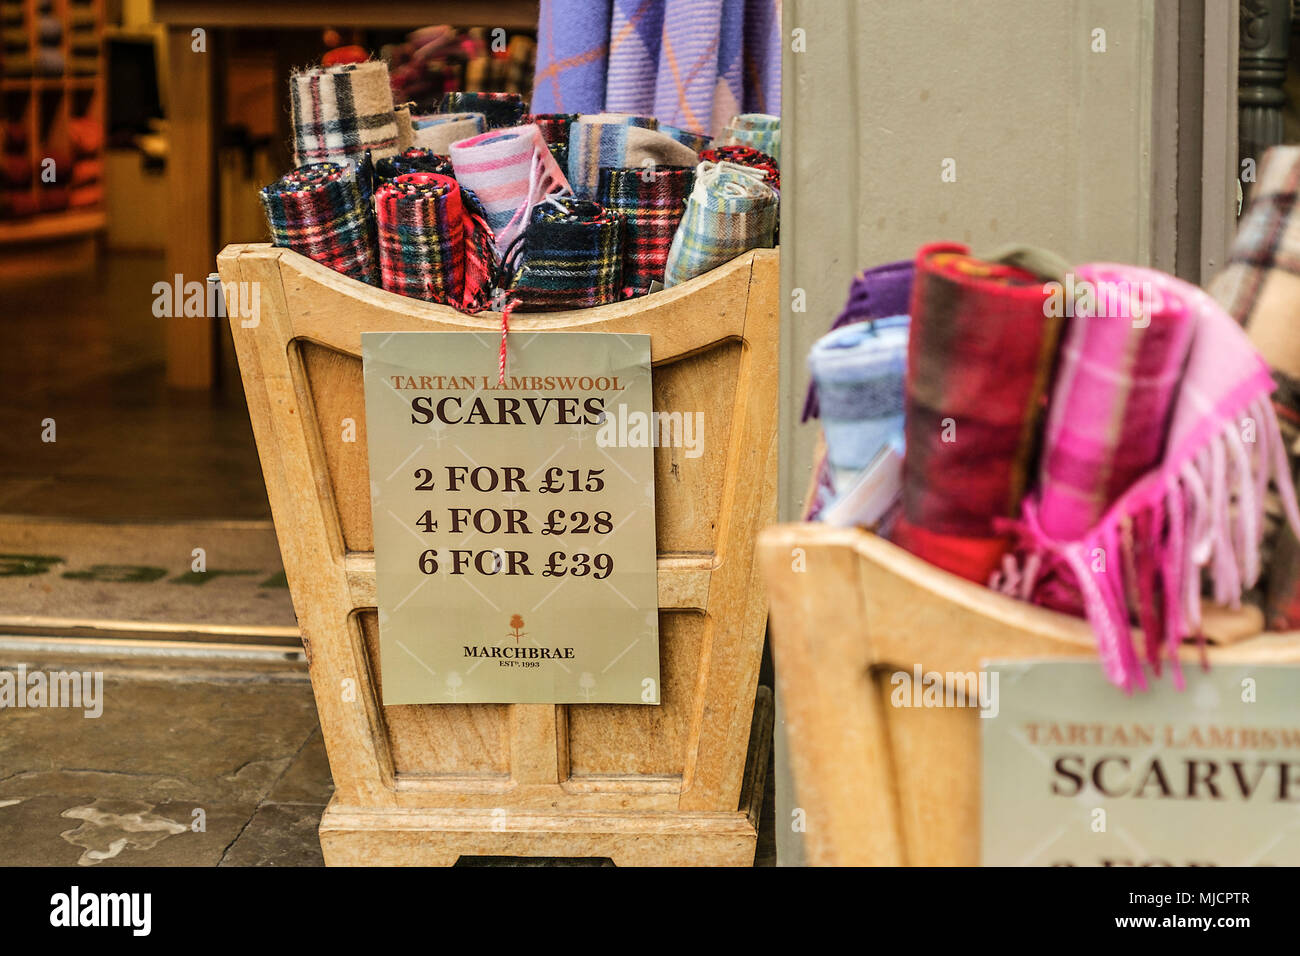 In a business numerous scarfs are offered in different variations in wooden boxes, Edinburgh, Highland, Scotland, Stock Photo